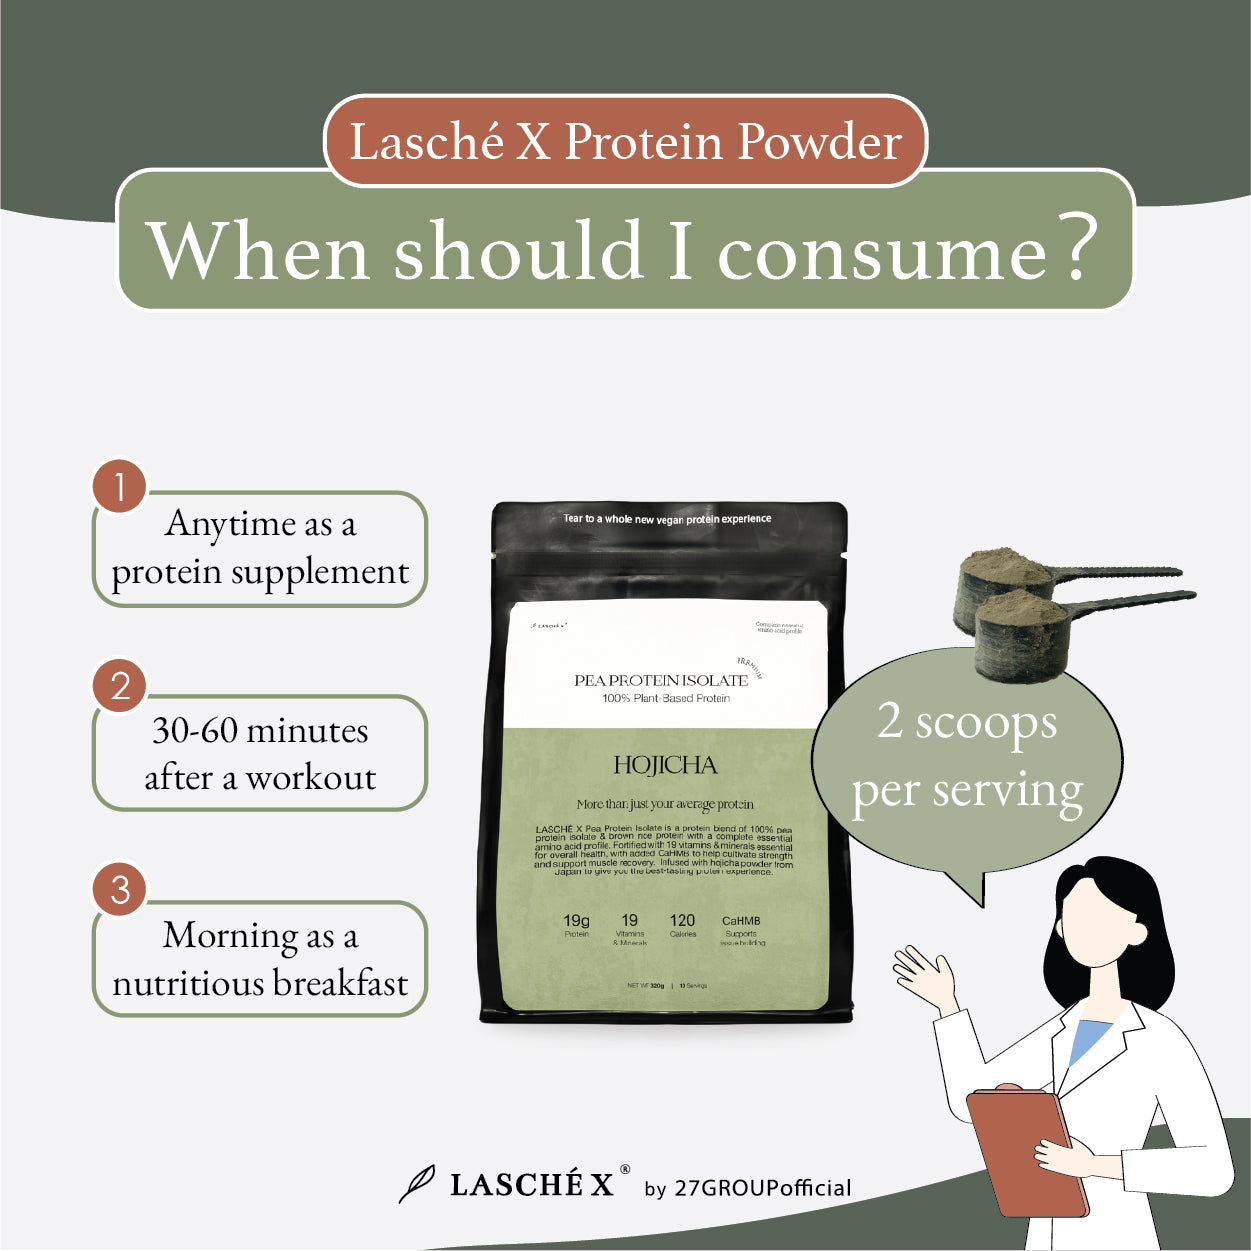 best time to consume laschex protein powder